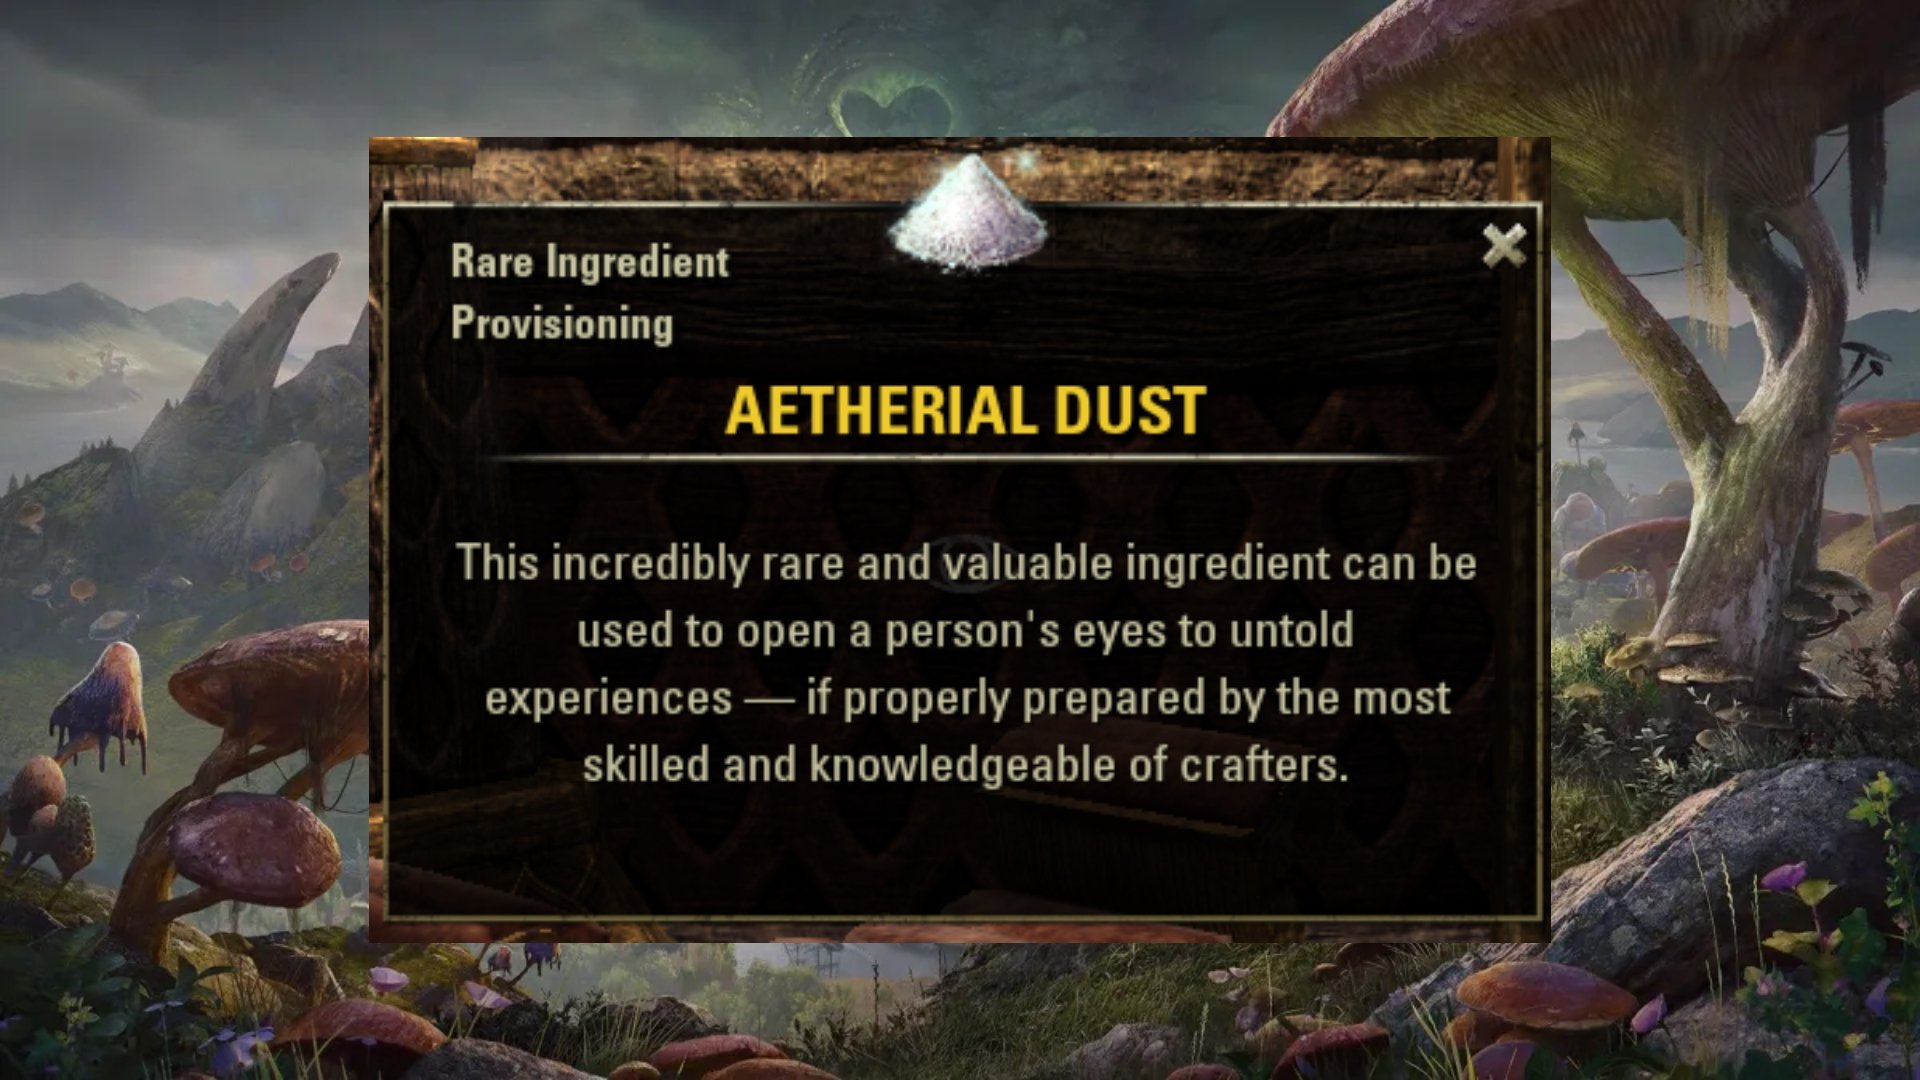 Aetherial Dust from ESO.